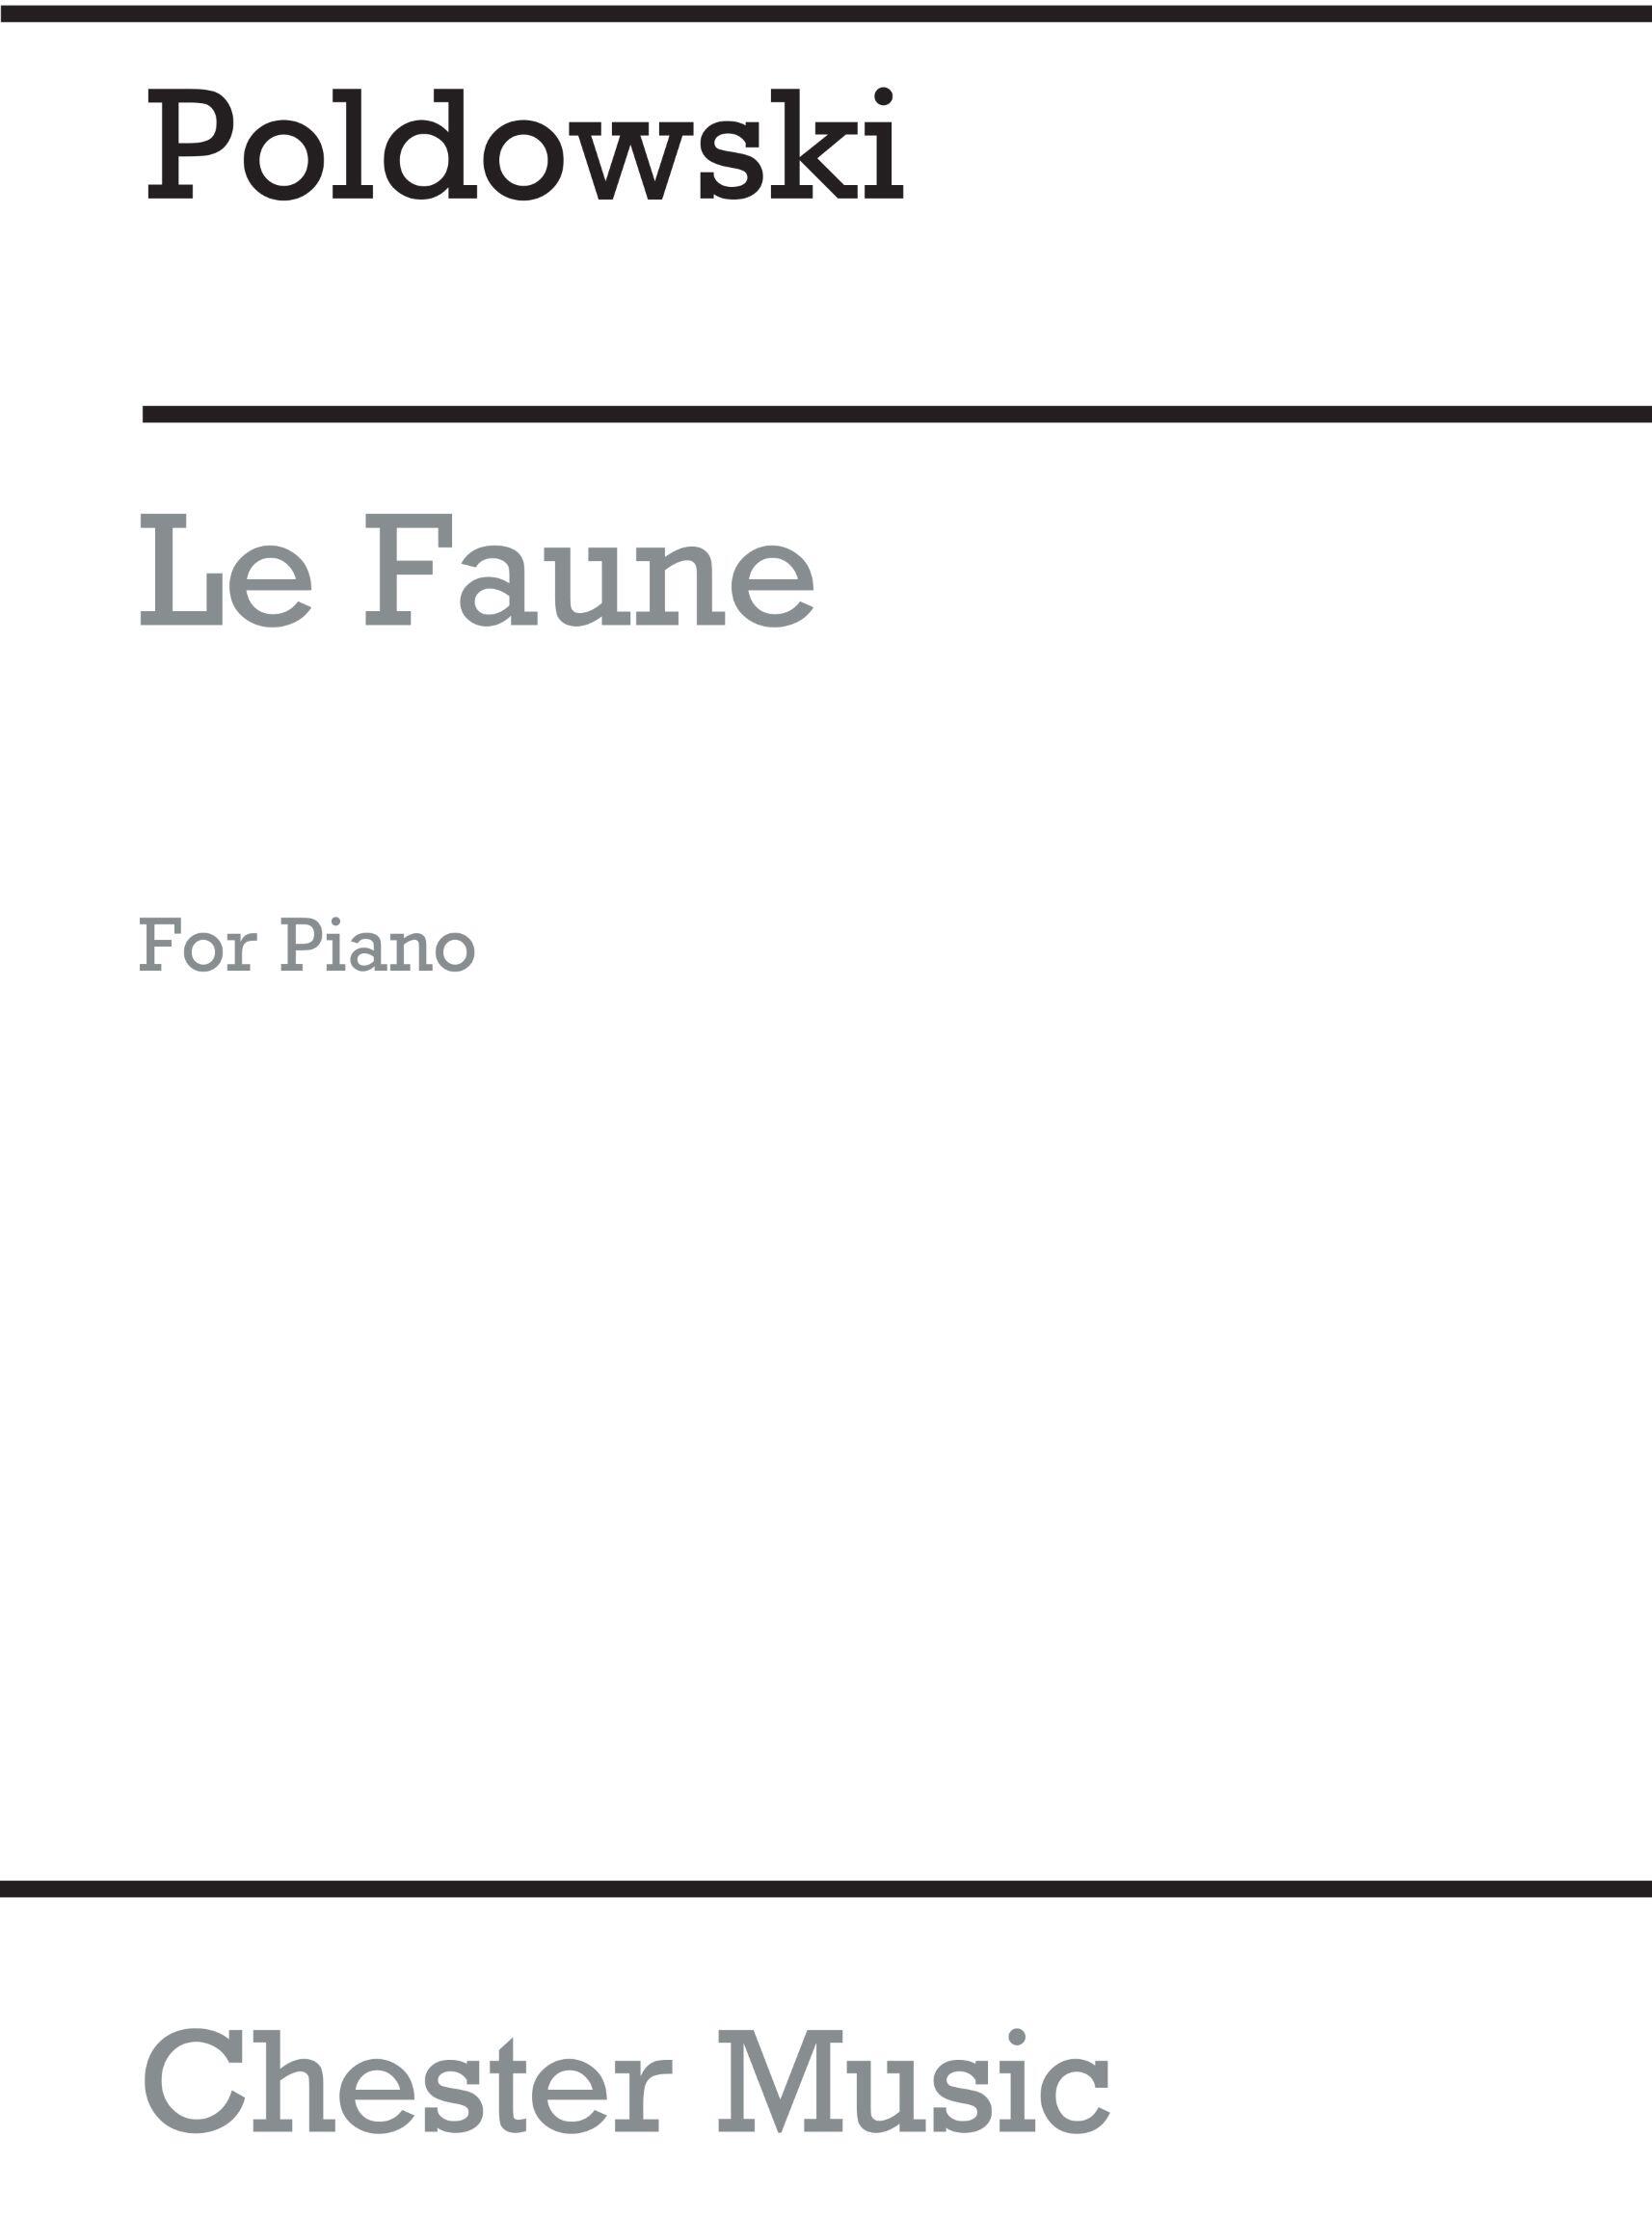 Le Faune for Voice with Piano acc. : photo 1